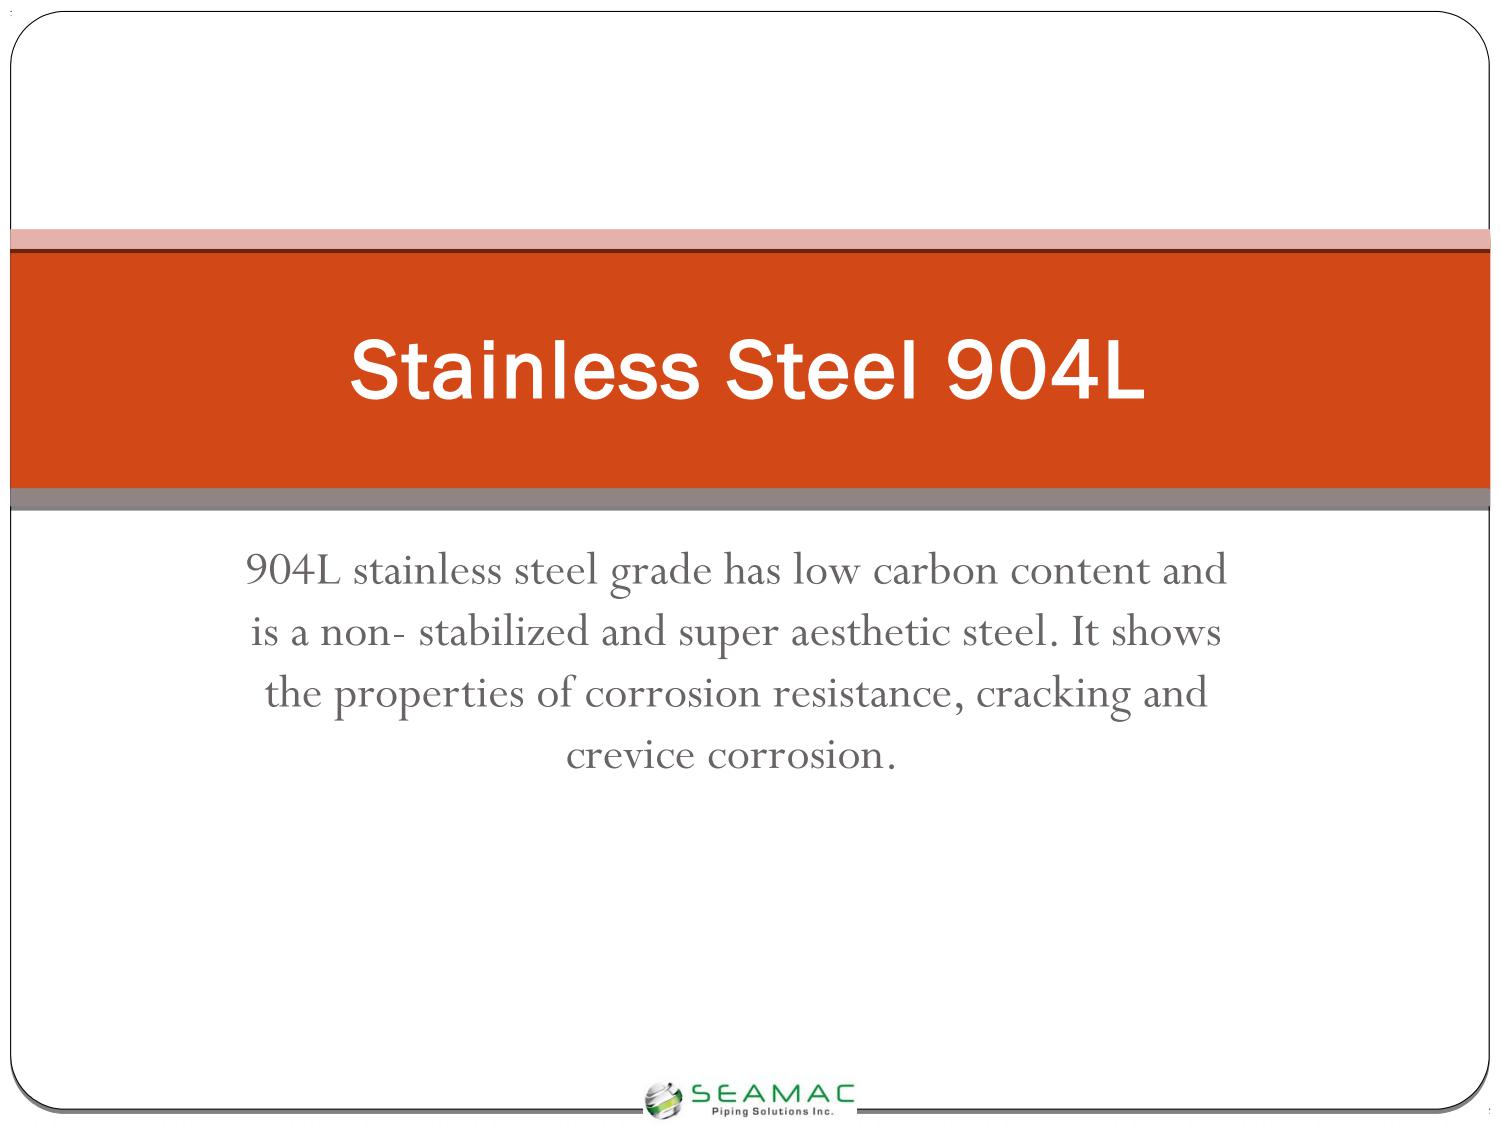 Stainless Steel 904L

 

904L stainless steel grade has low carbon content and
is a non- stabilized and super aesthetic steel. It shows
the properties of corrosion resistance, cracking and

crevice corrosion.

 

\ __ eeamAc__
TF rena seretiens tne